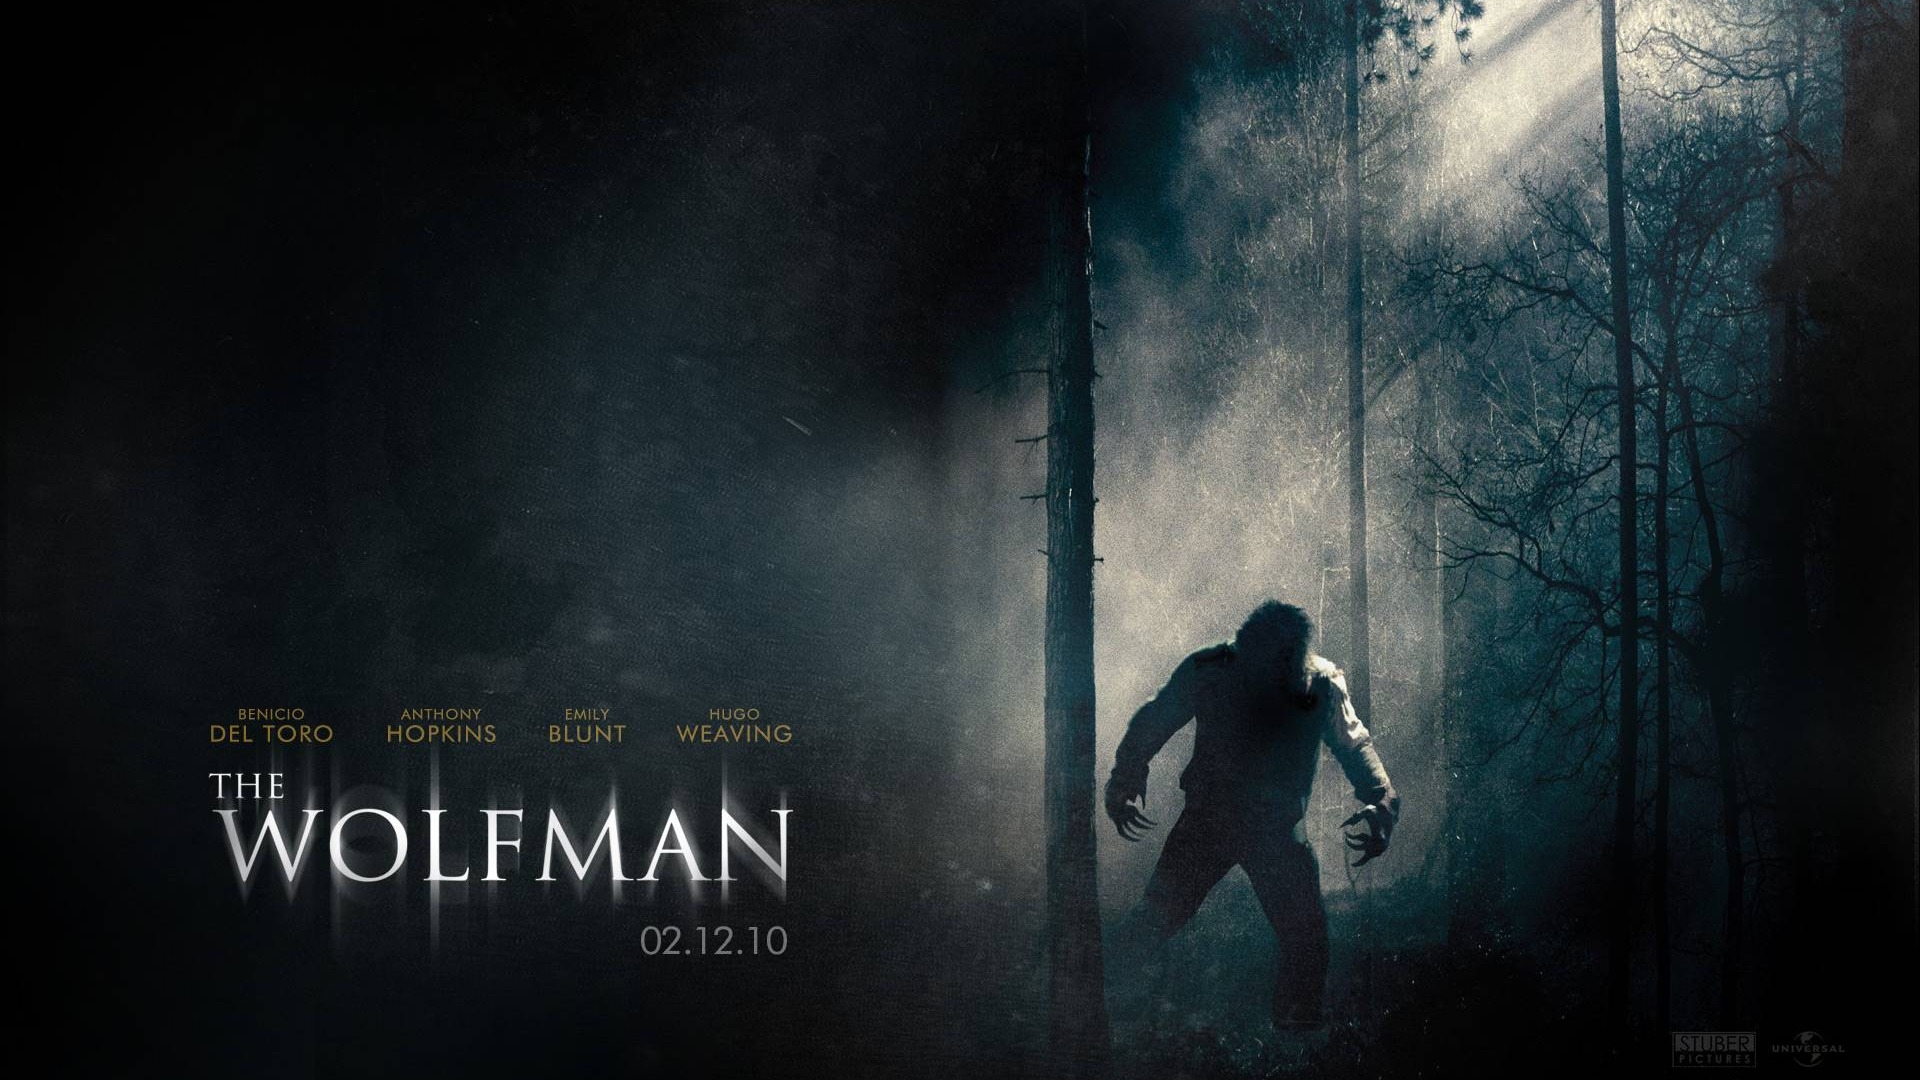 The Wolfman Movie Wallpapers #2 - 1920x1080